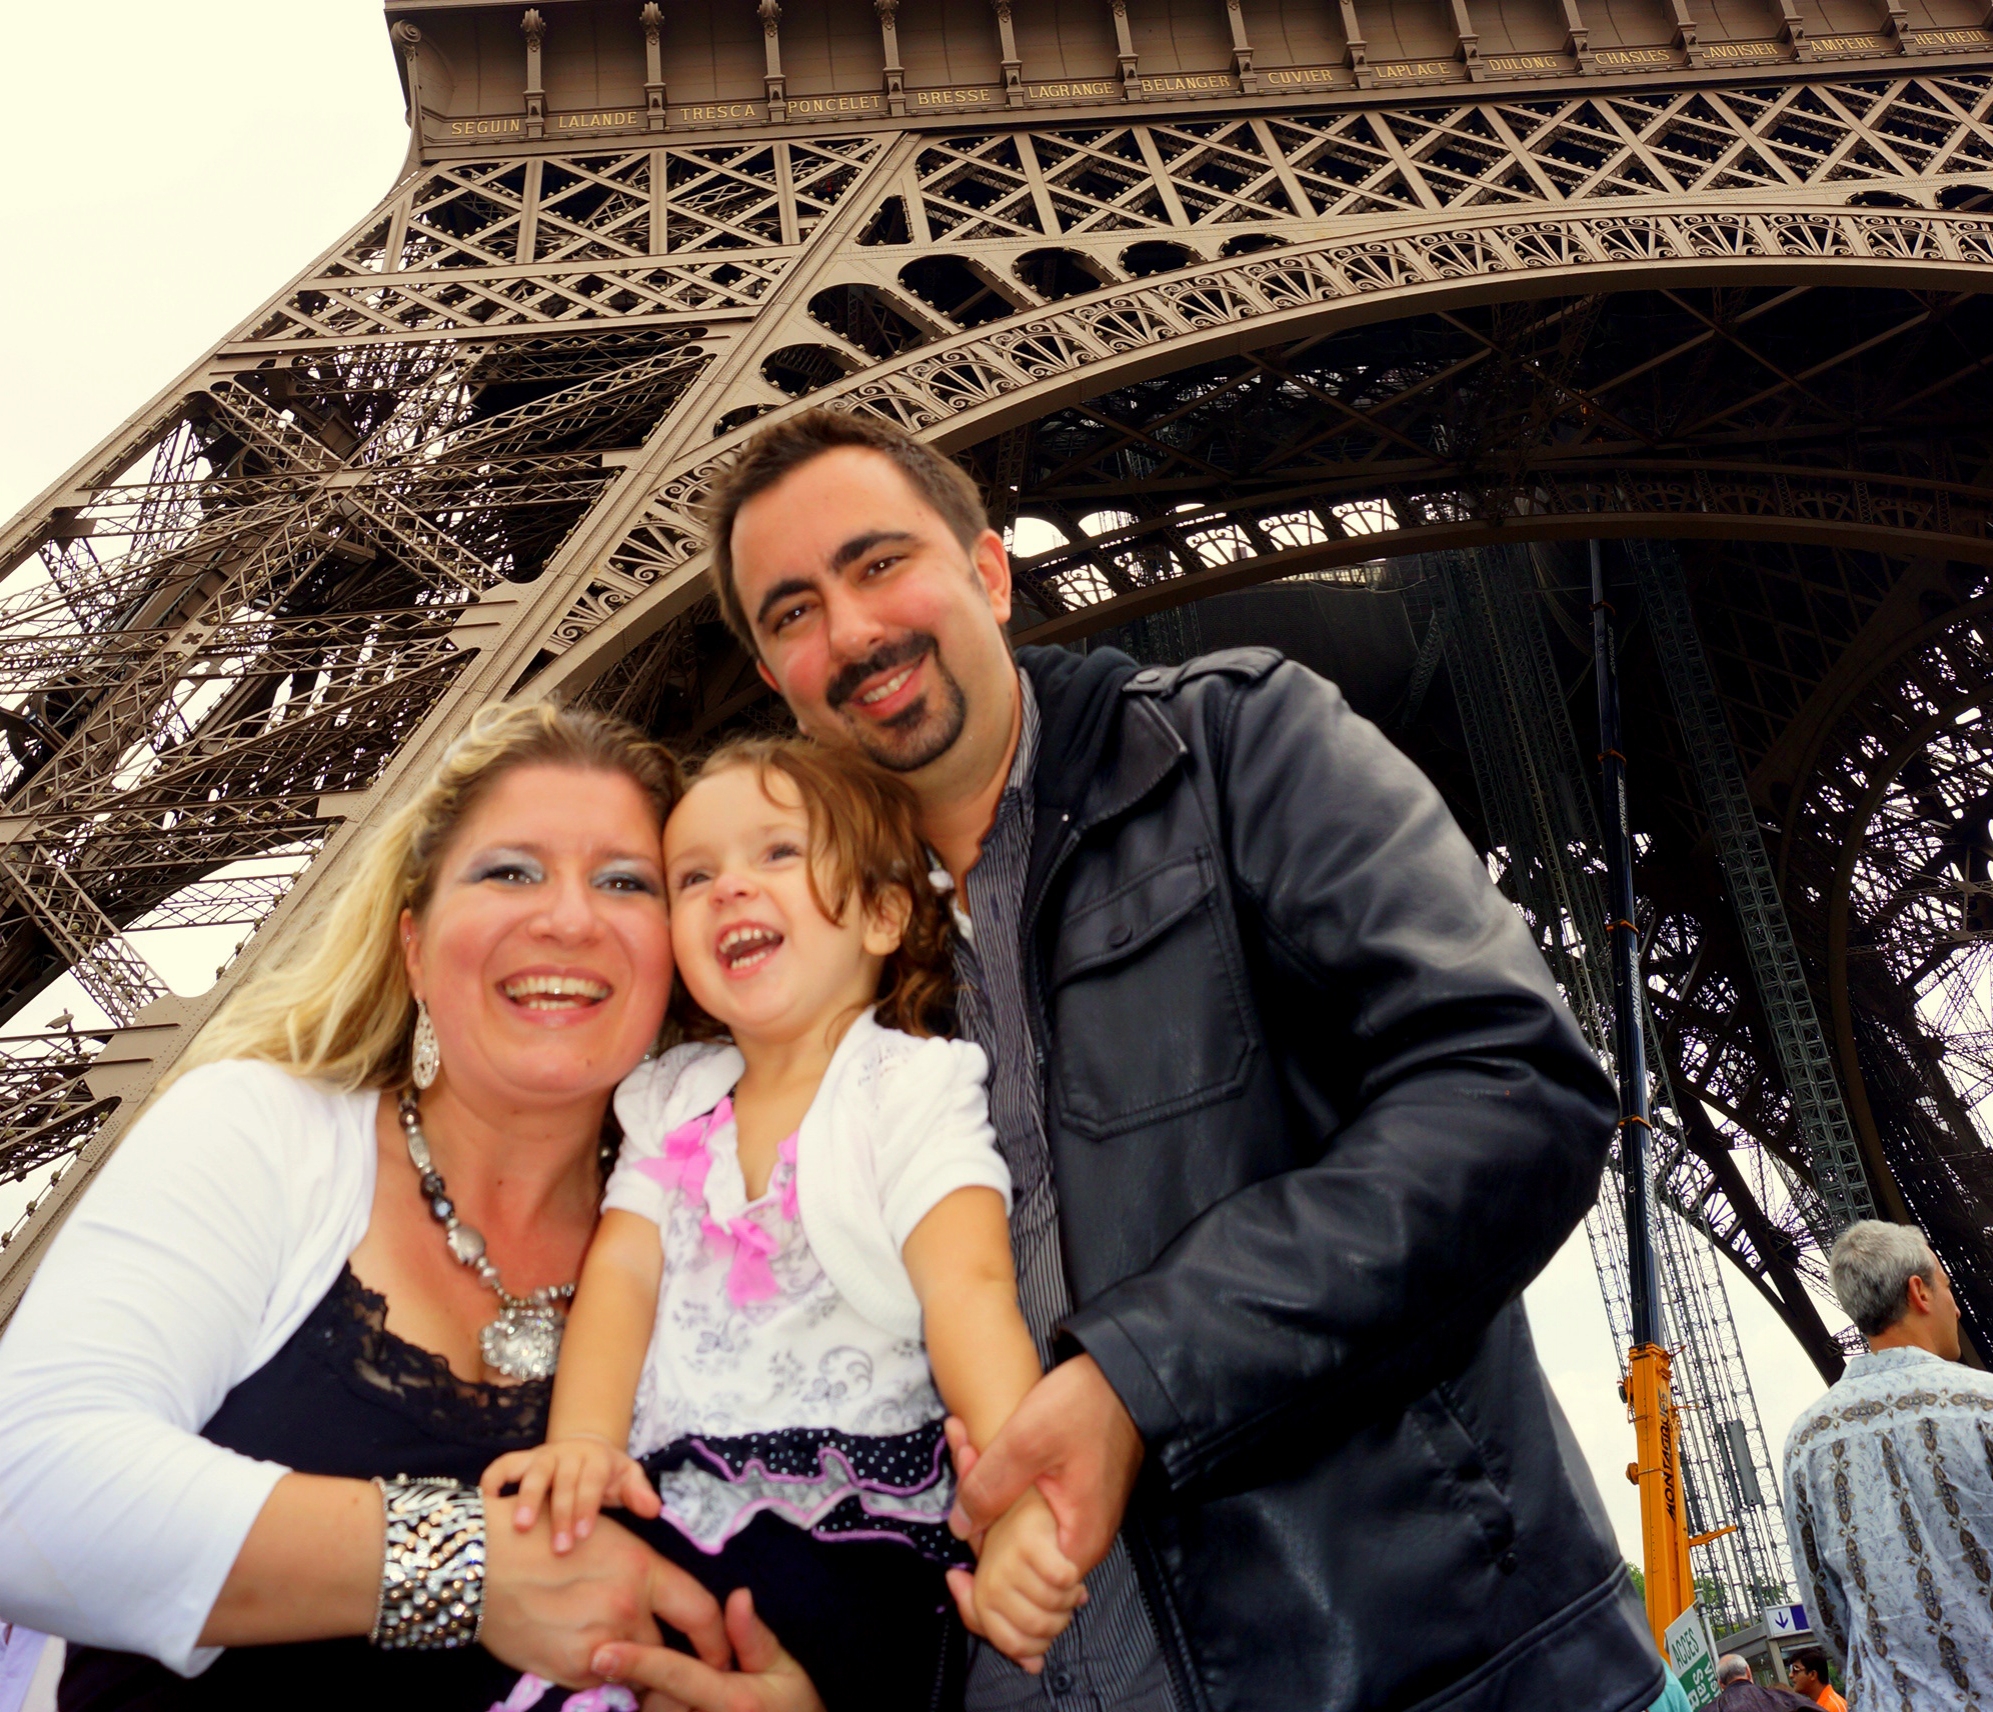 At the Eifel Tower